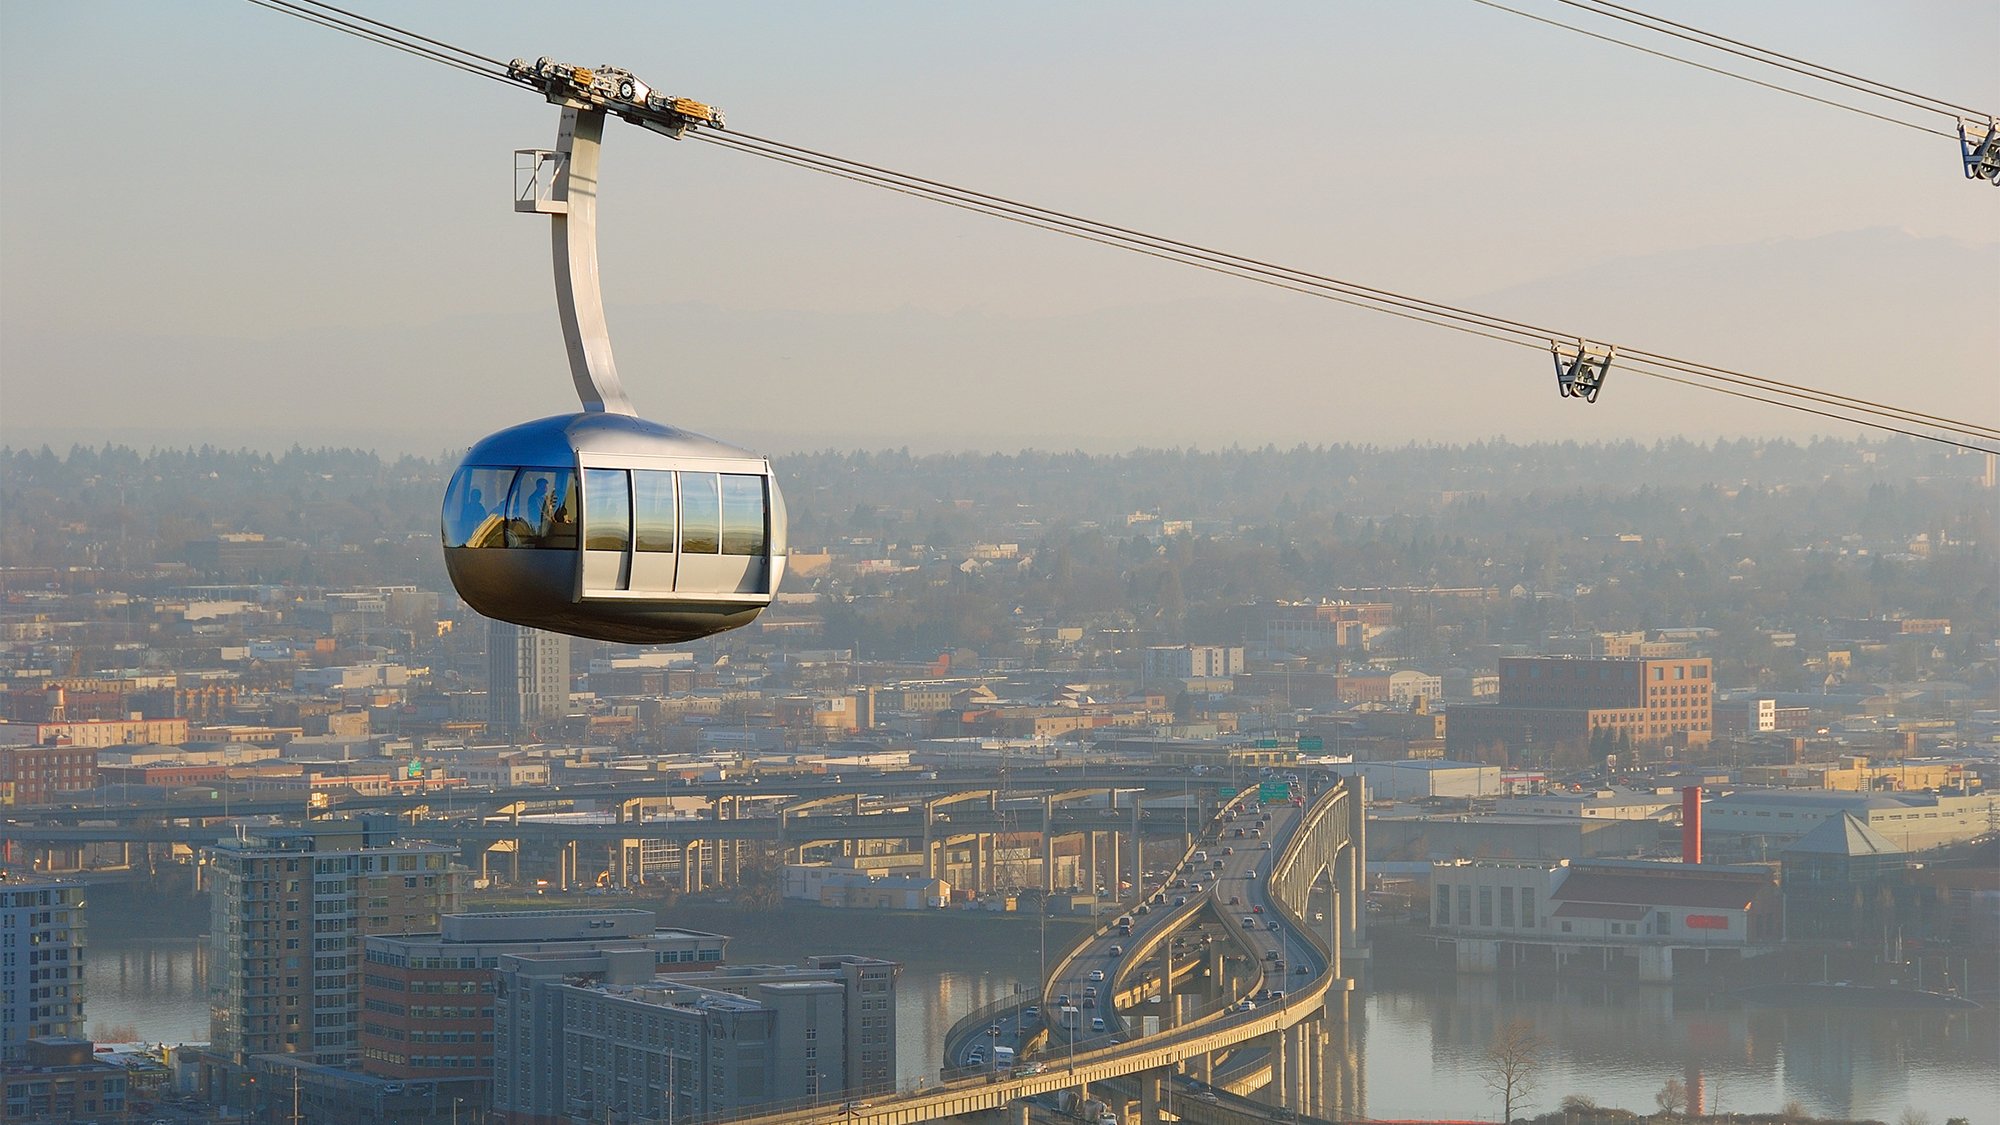 The Portland Aerial Tramway consists of three primary structures and two suspended cable cars and was modeled and analysed in 3D. Photo: Kent Anderson